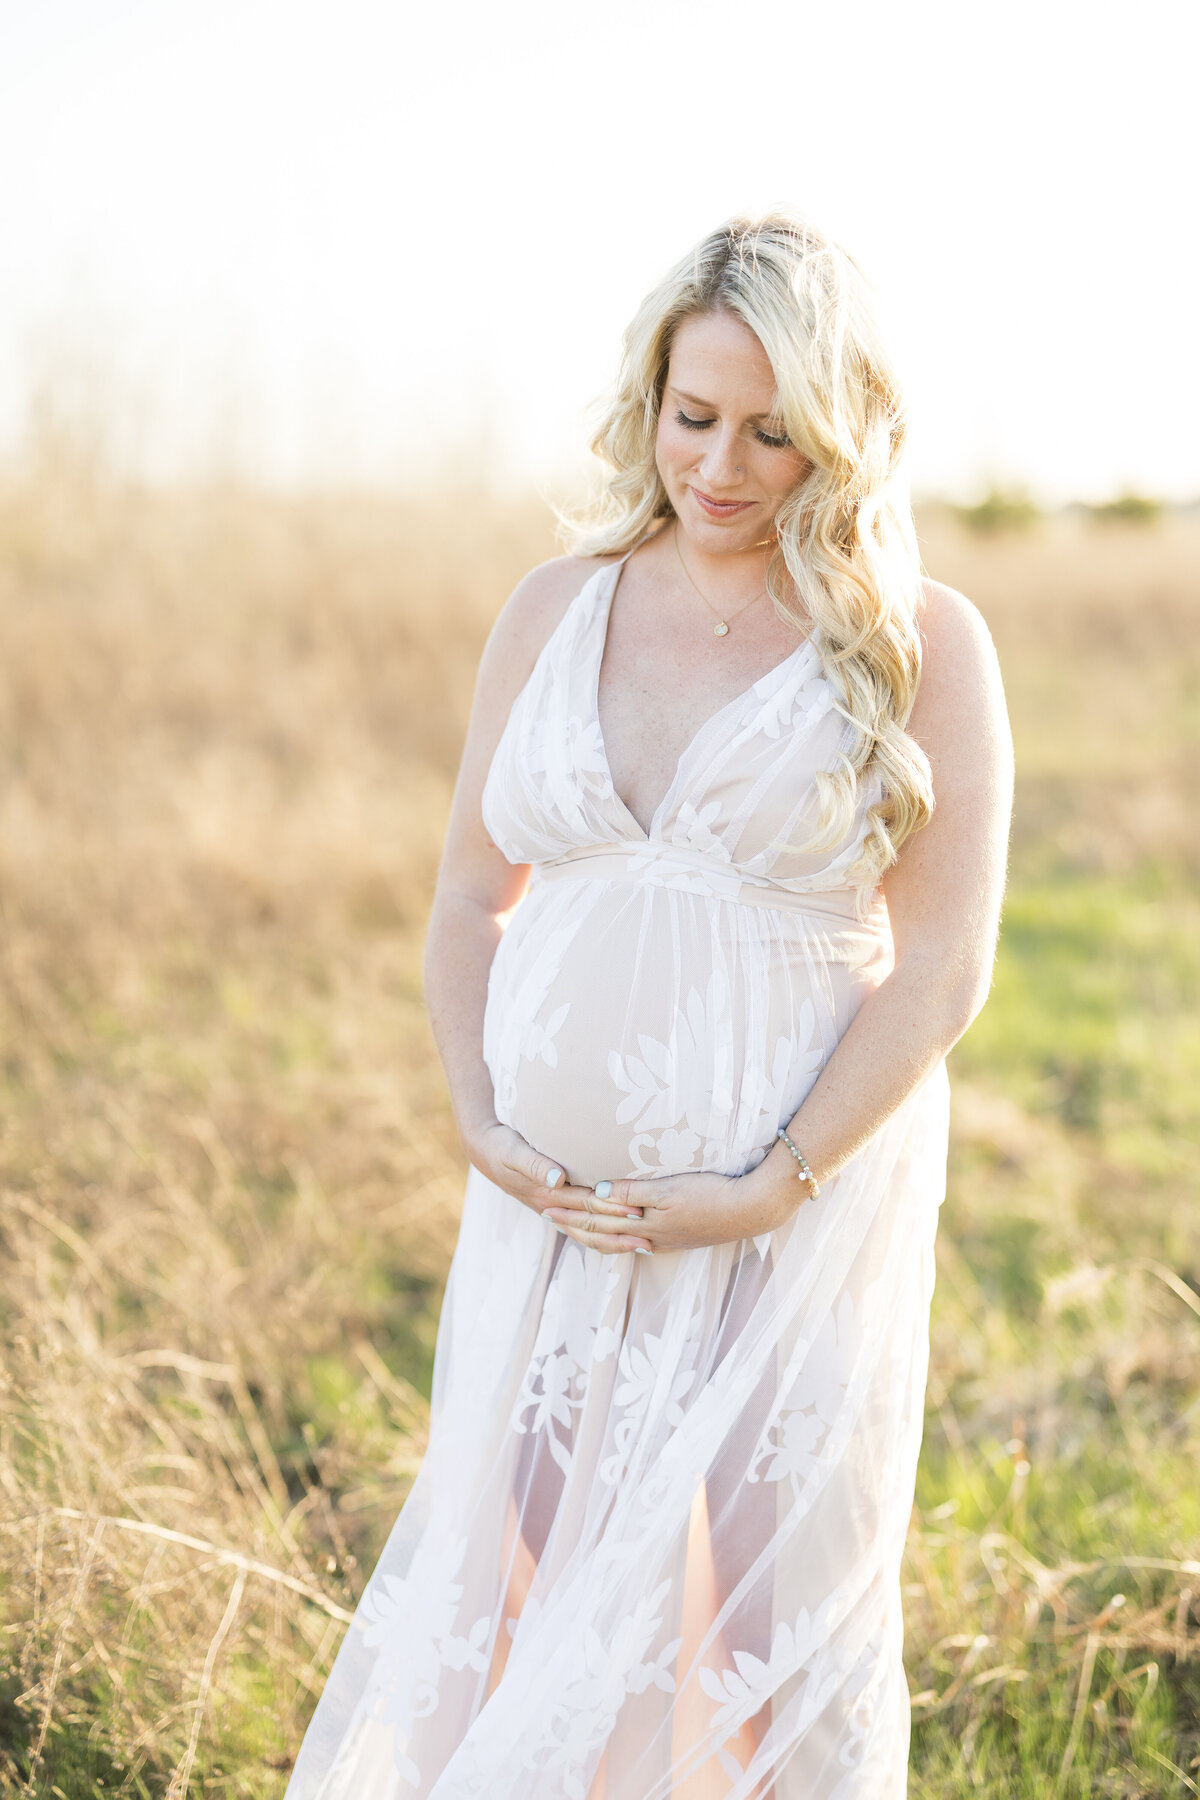 Pregnant woman standing in a field holding her belly